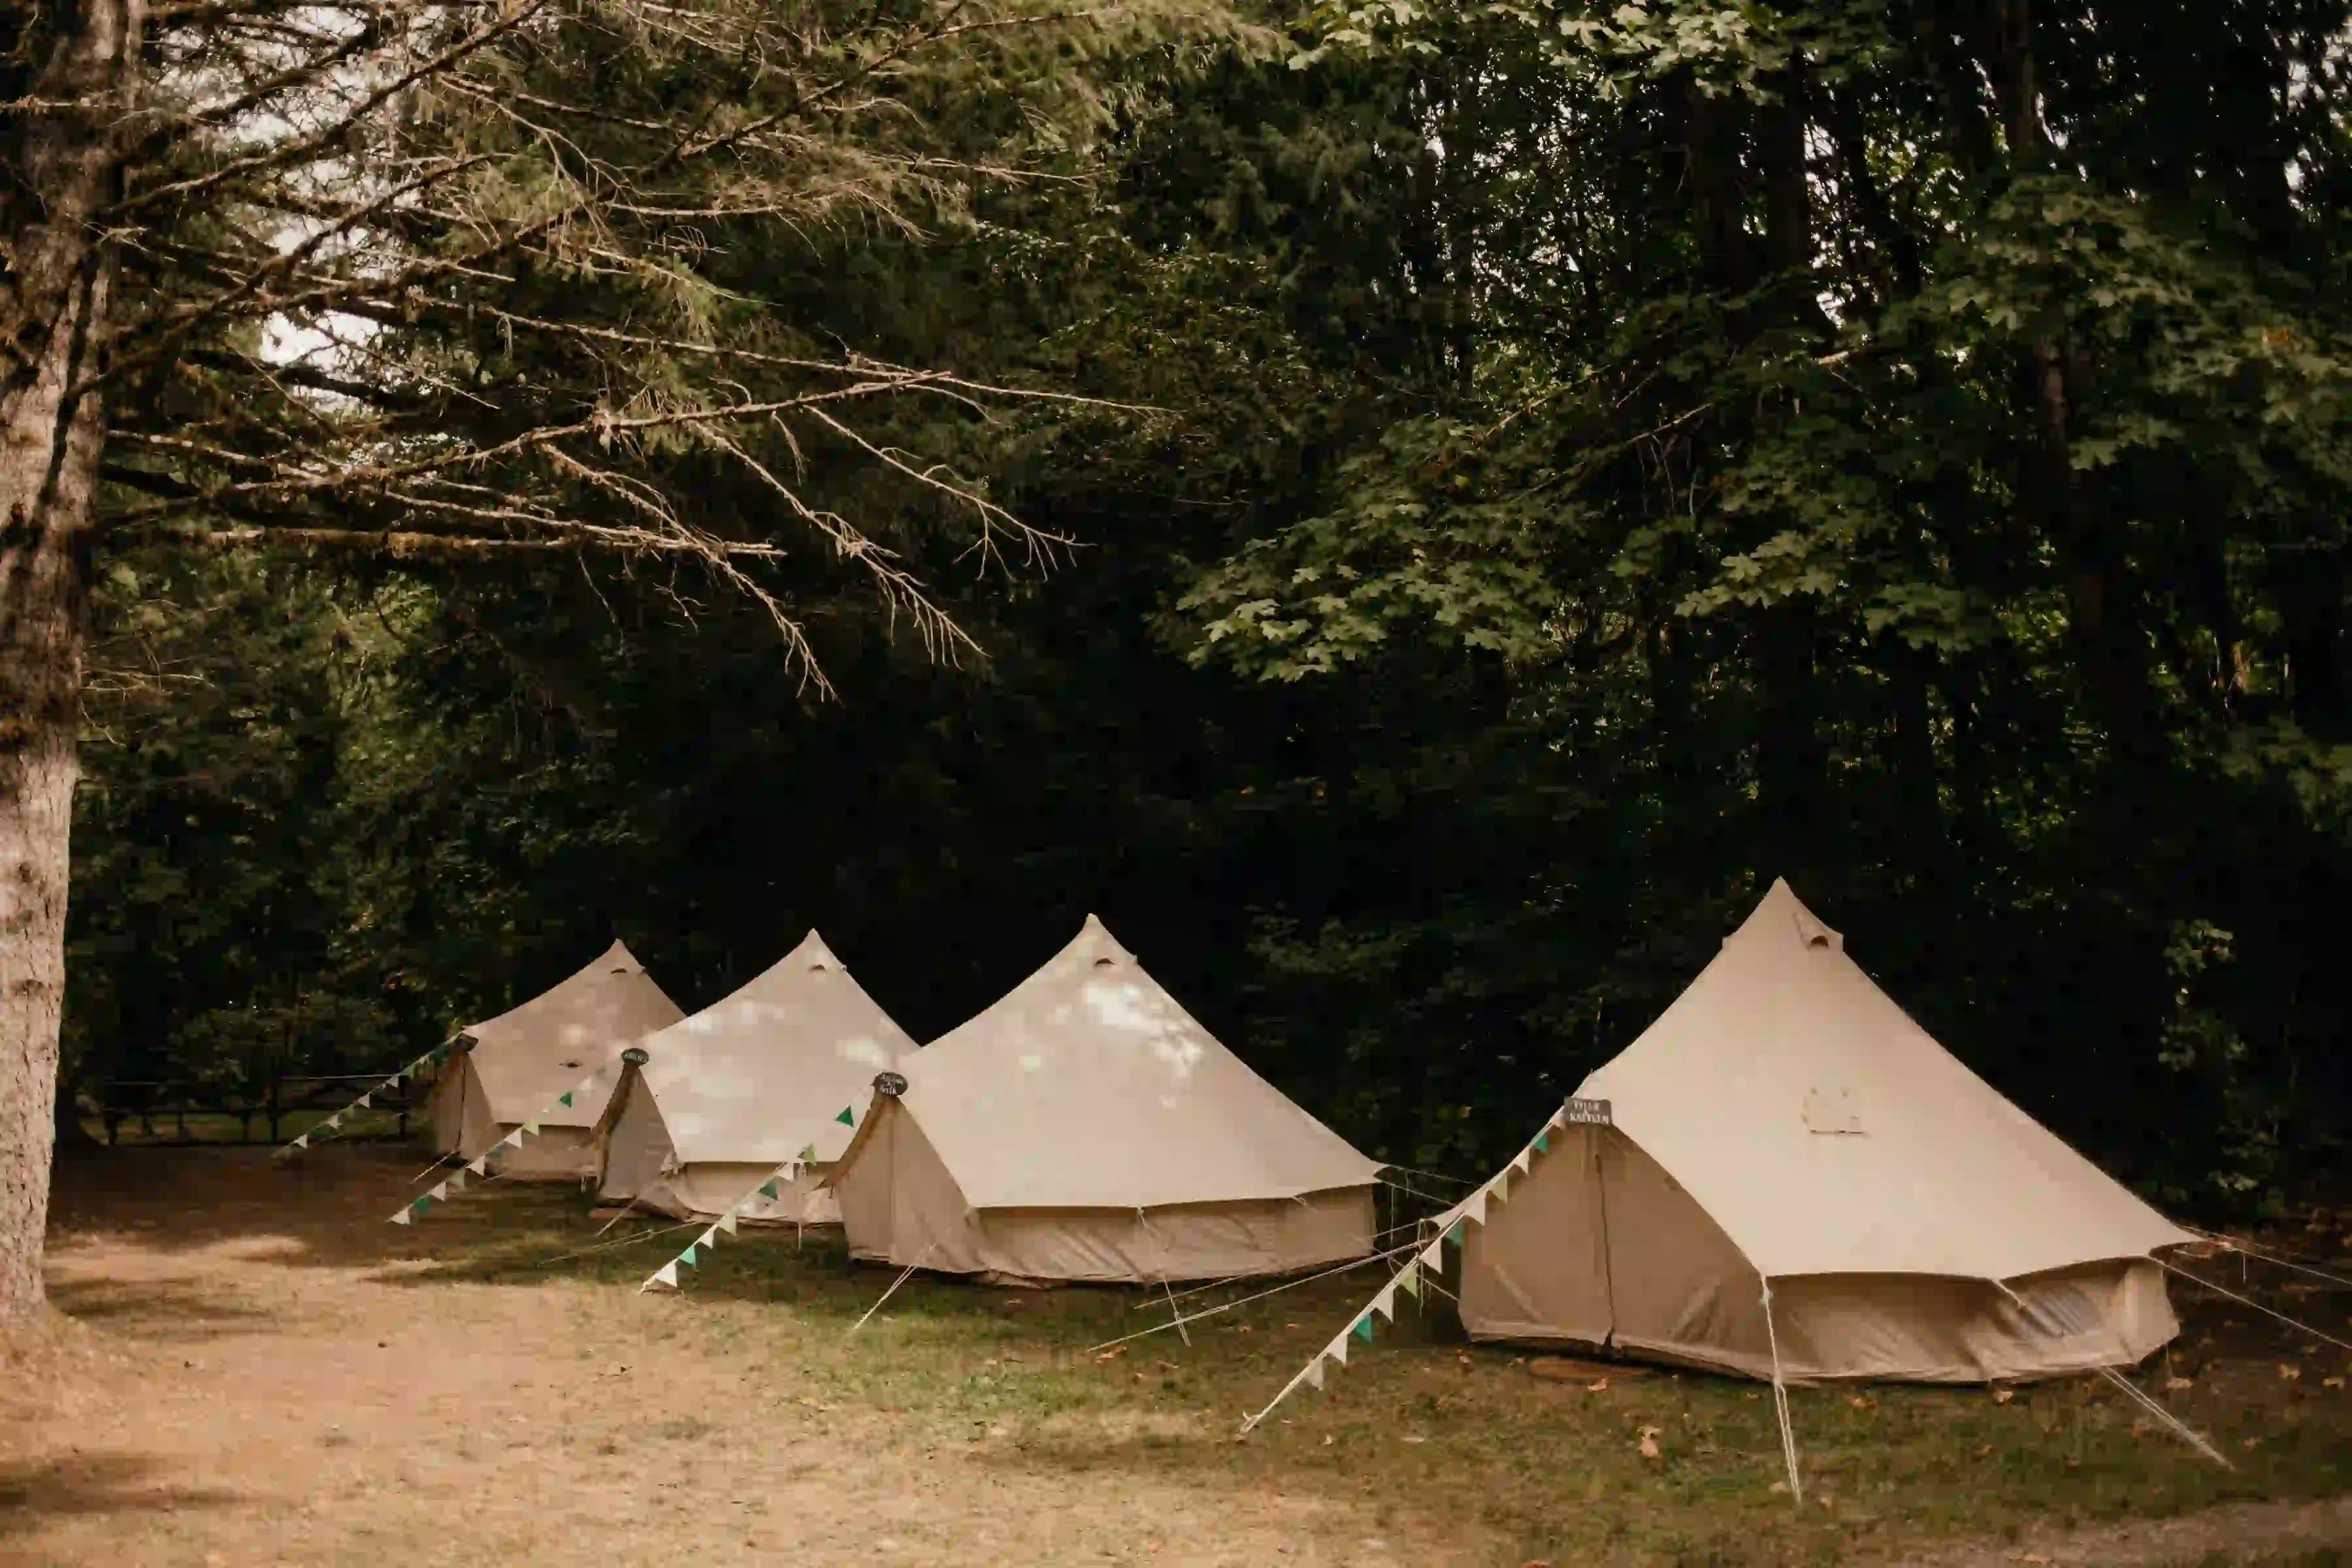 Row of white tents in a wooded camping area.